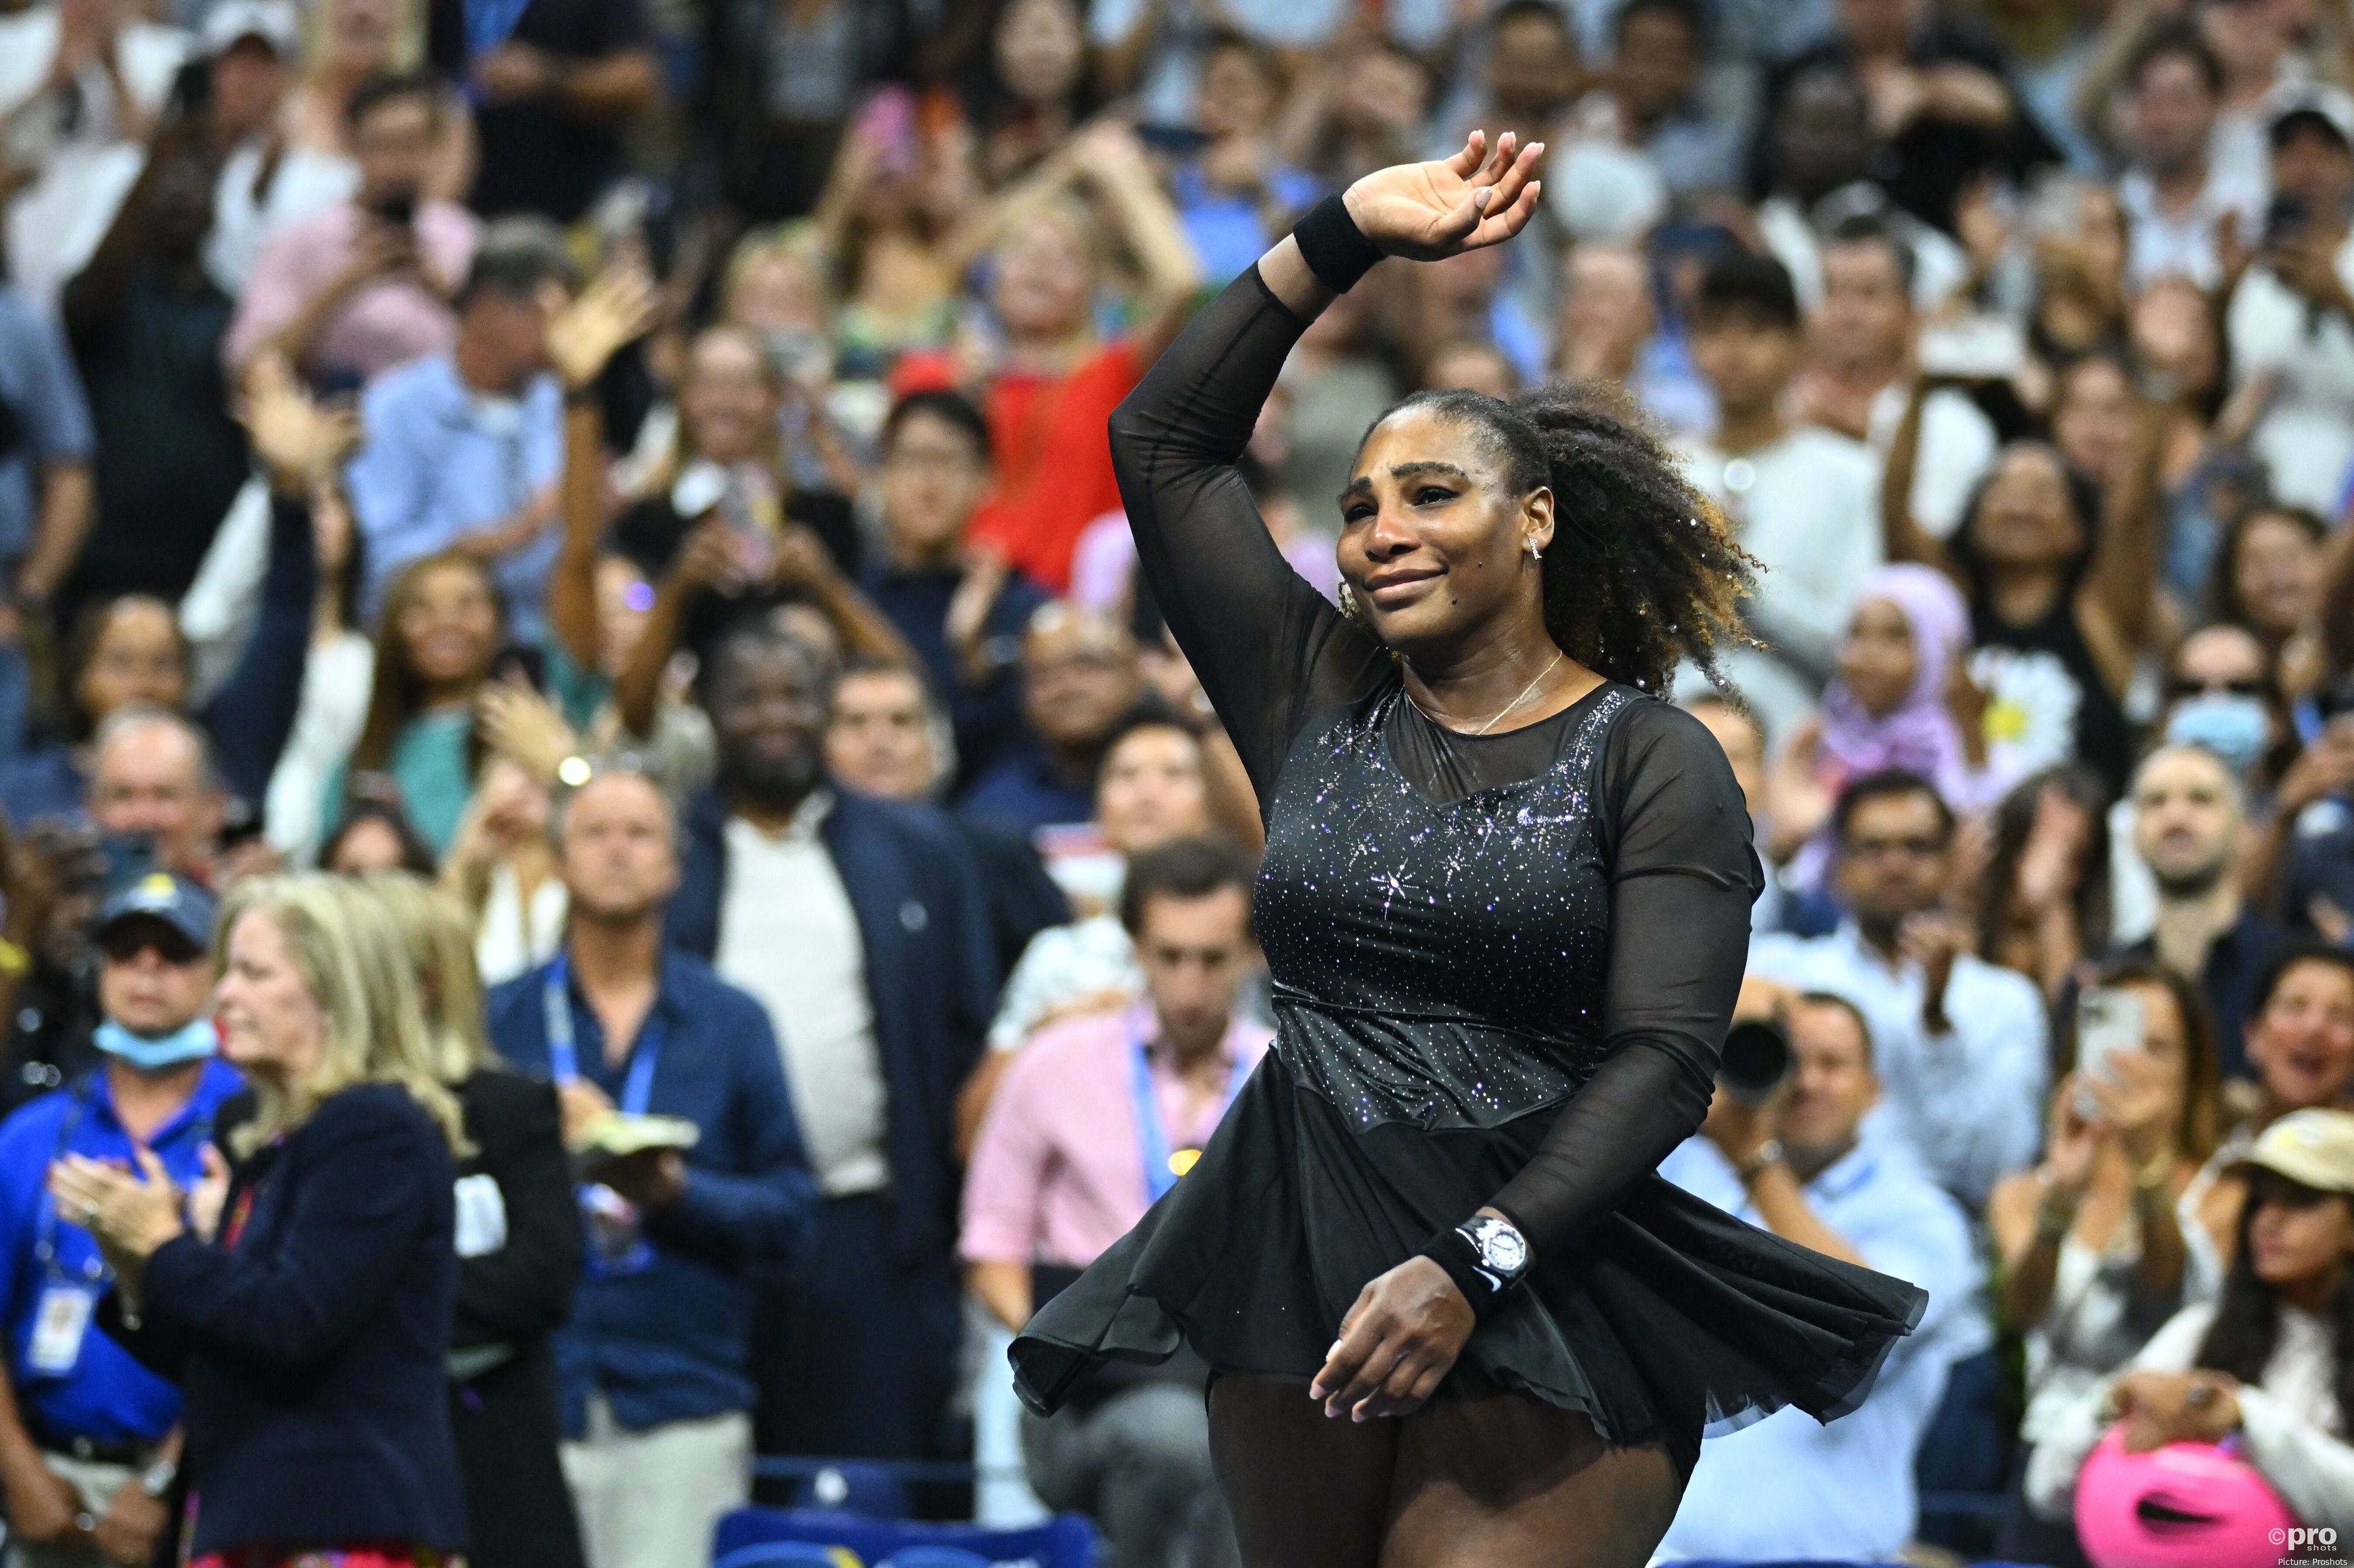 Serena Williams plays her last match in the fourth round of the 2022 US Open.